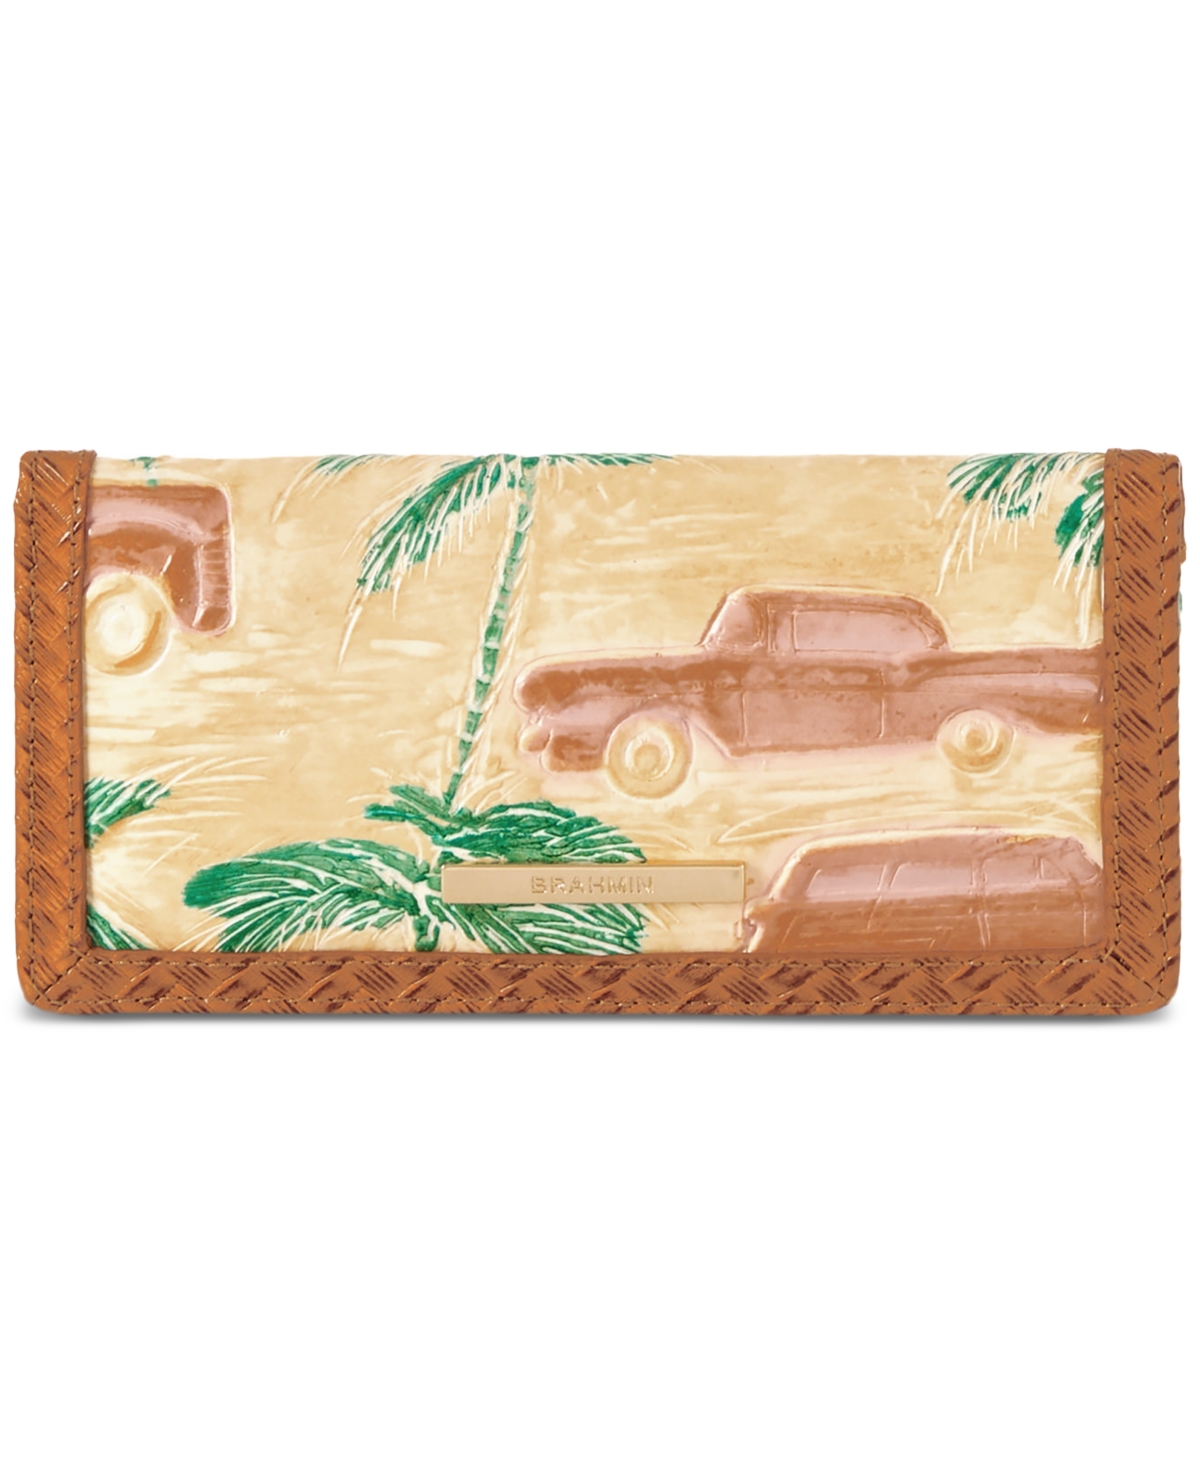 Ady Leather Wallet - Honey Brow